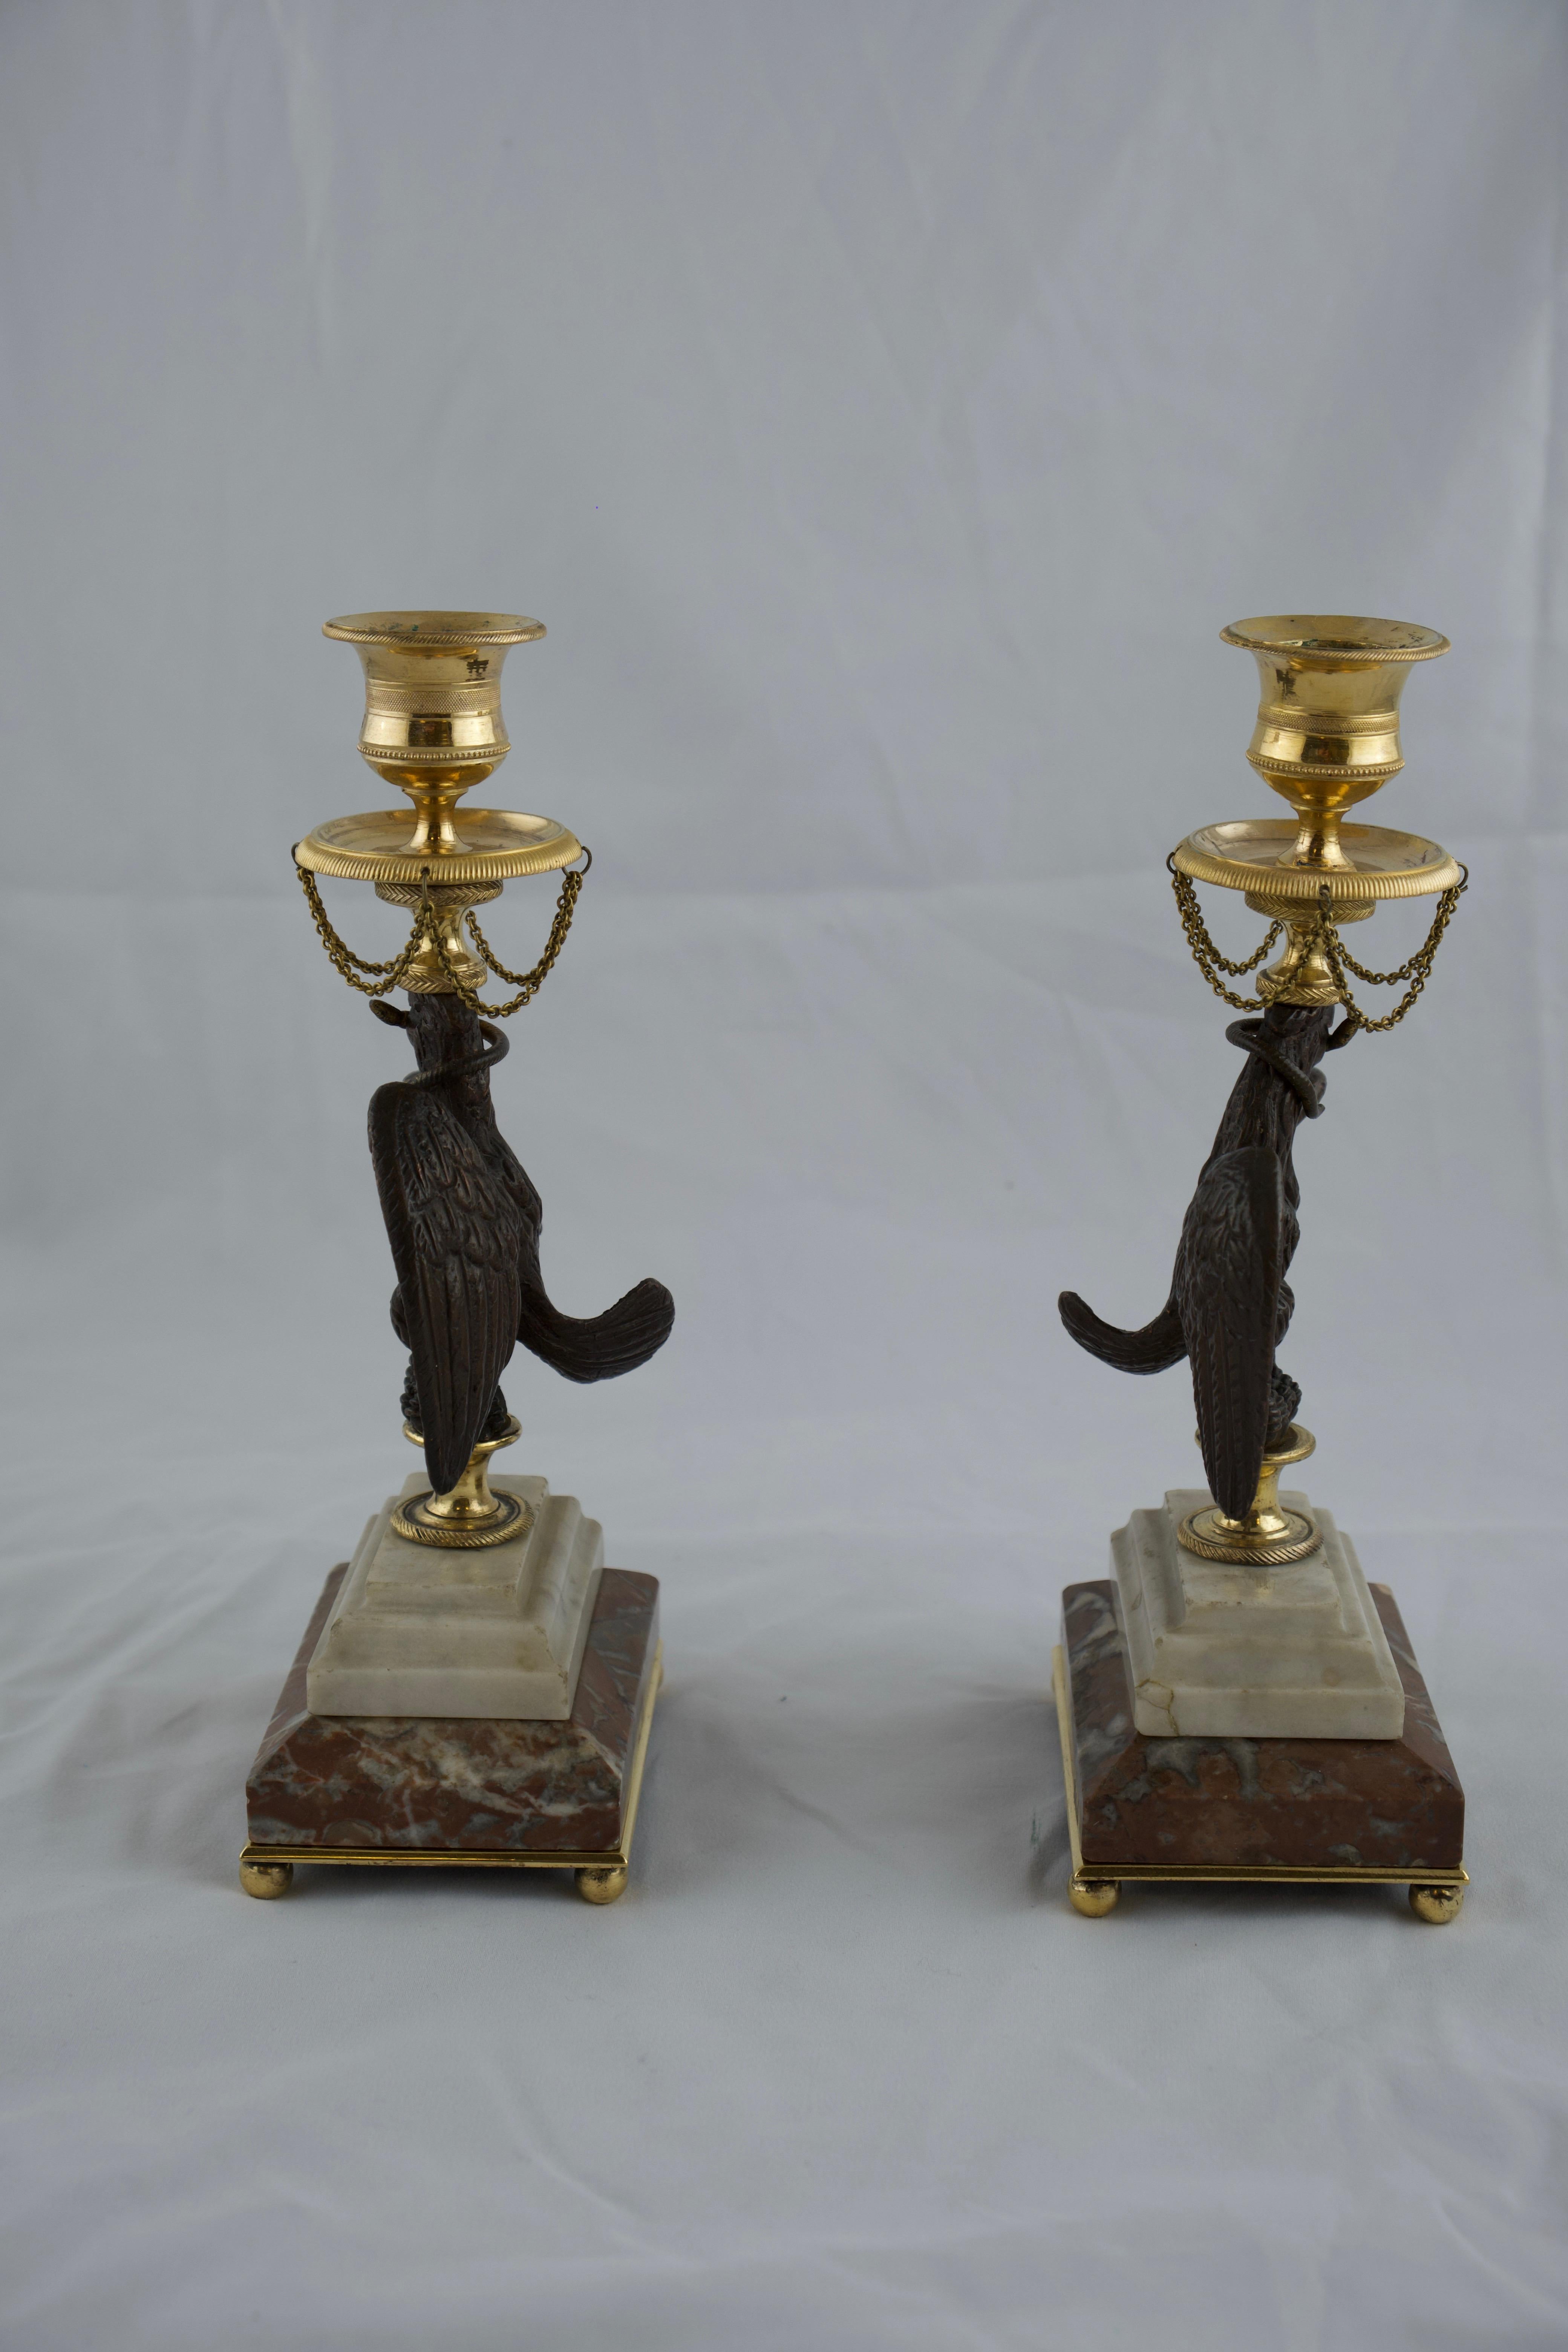 A rare and finely designed Empire candlesticks made in the early 19th c. Standing on a rectangular marble base are cast bronze eagles that holds gilt bronze unshaped candleholders. An interesting and good thing is that the eagles are paired so they